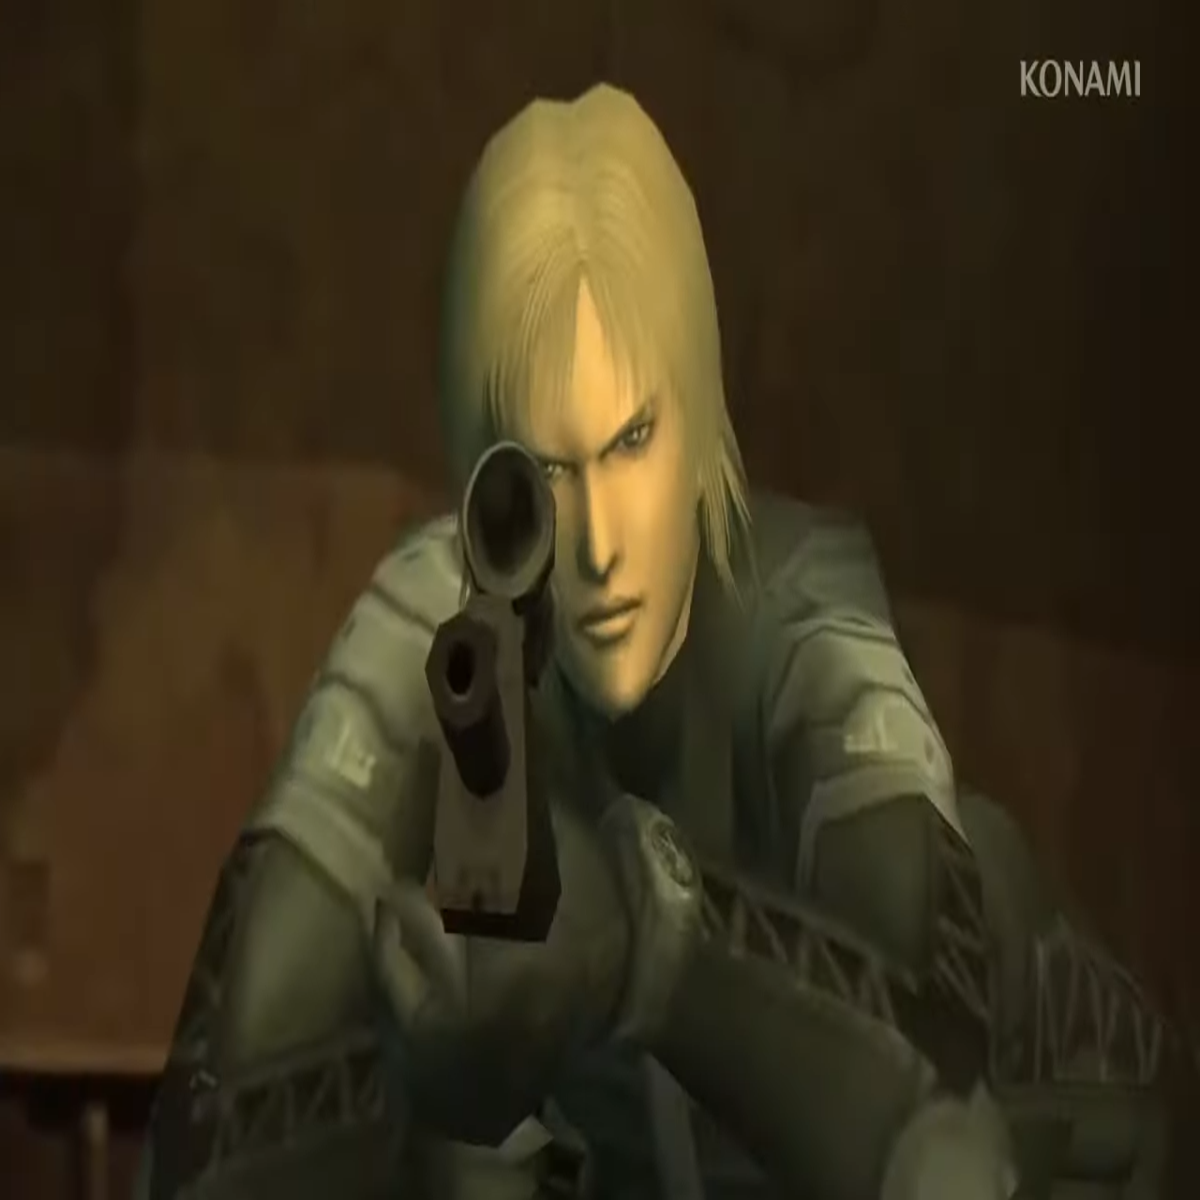 Metal Gear Solid collection has two more games than expected